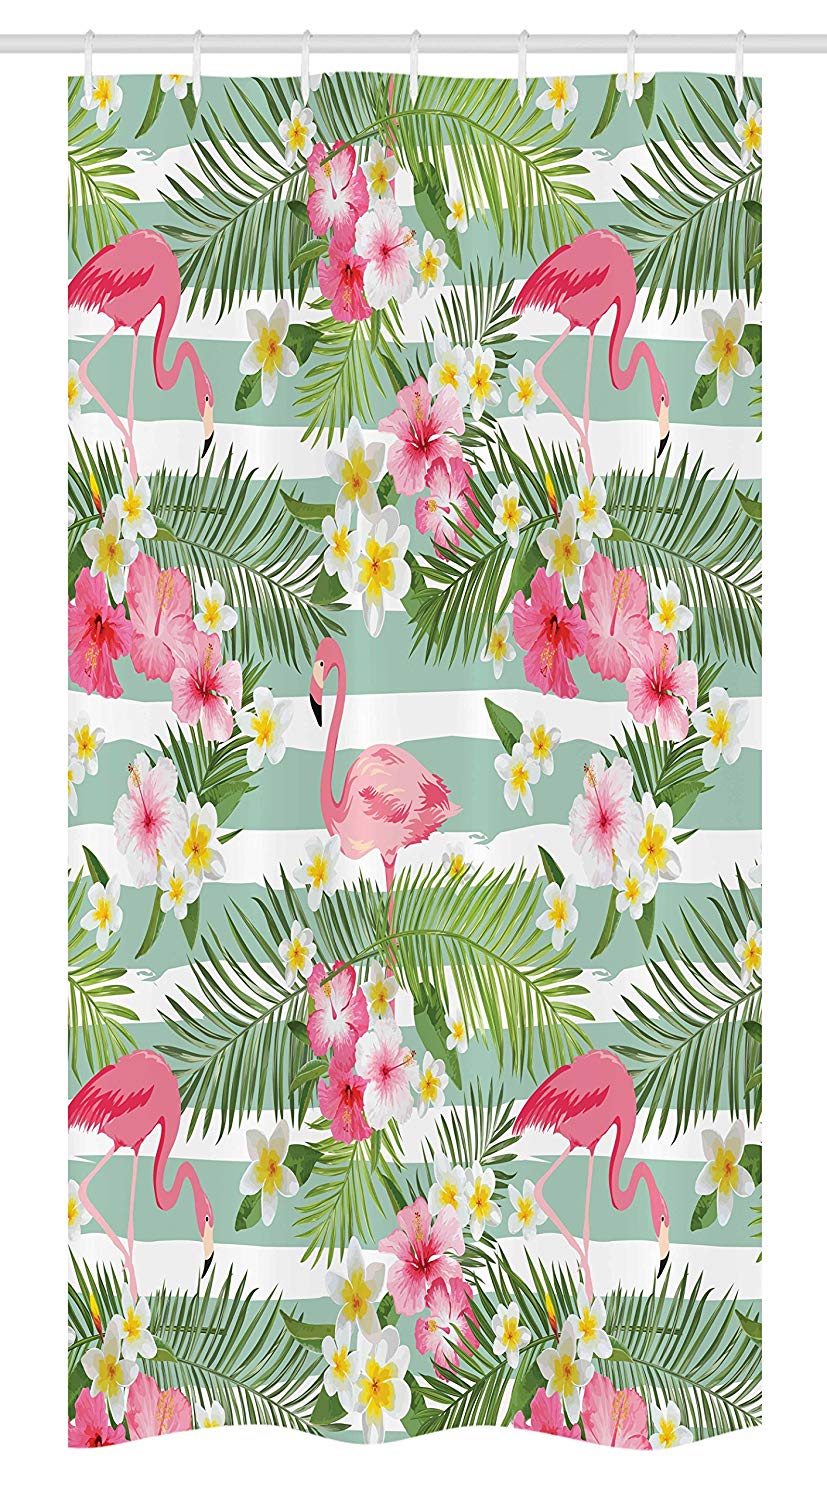 Ambesonne Flamingo Stall Shower Curtain, Flamingos with Exotic Hawaiian Leaves Flowers on Striped Vintage Background, Fabric Bathroom Decor Set with Hooks, 36" X 72", Green Pink